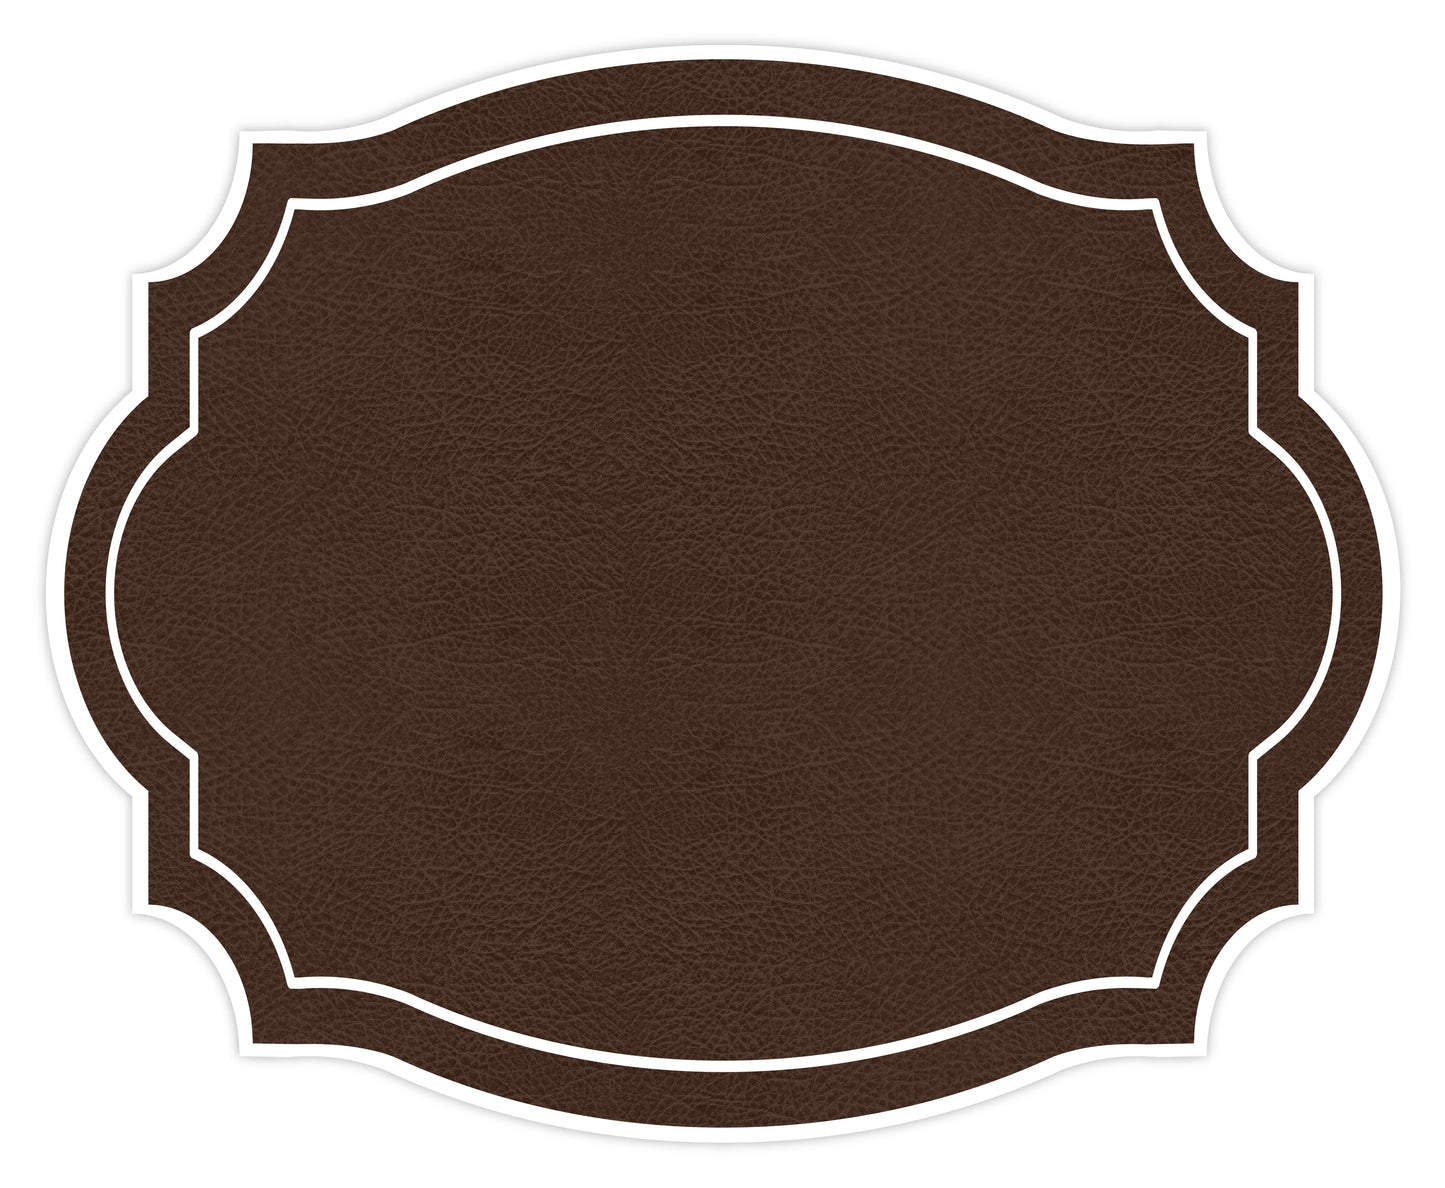 VINTAGE FRAME BROWN LEATHER LOOK PAPER PLACEMAT